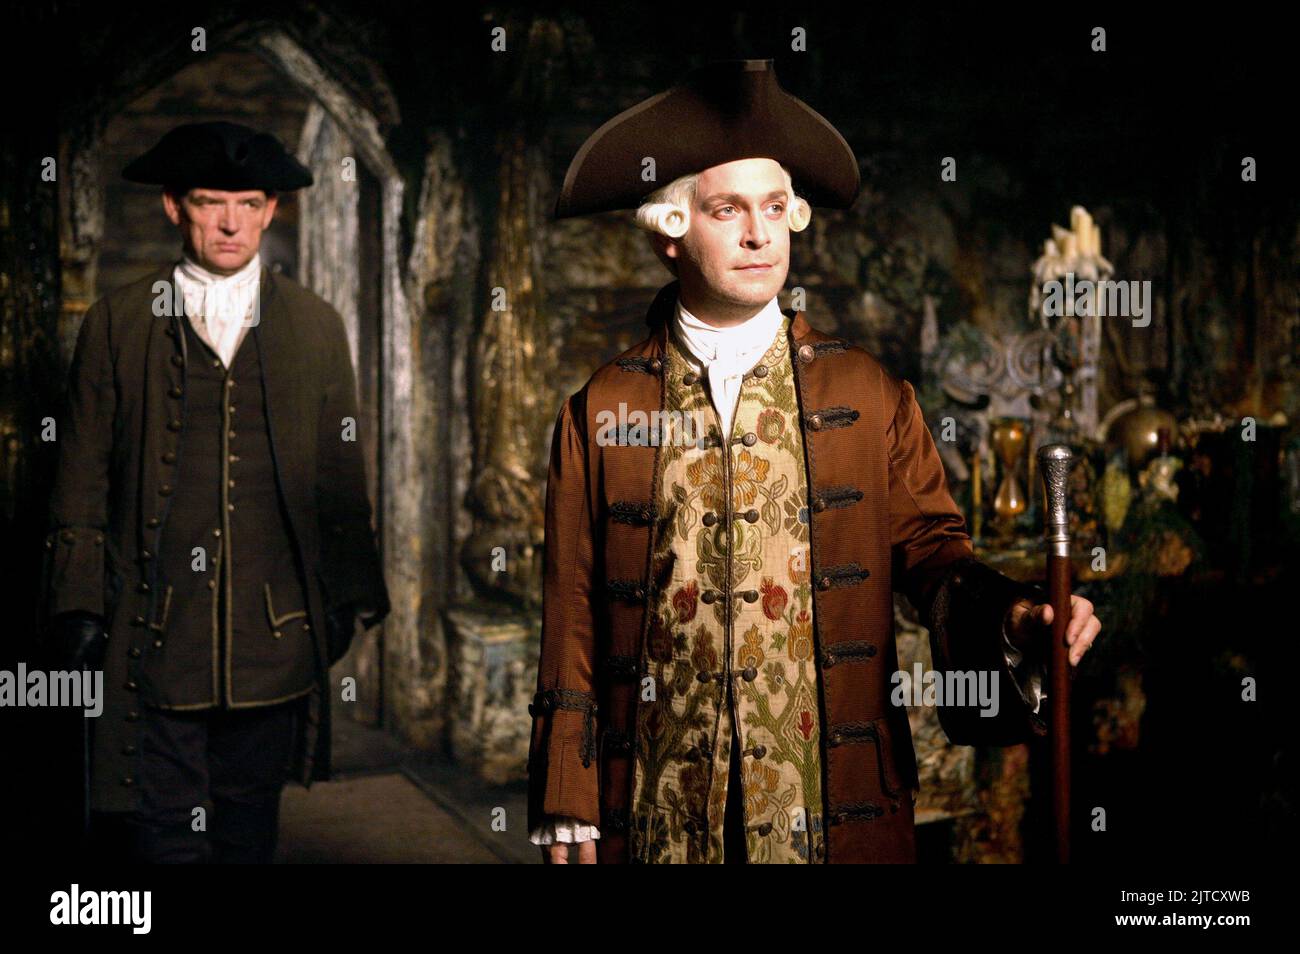 DAVID SCHOFIELD, TOM HOLLANDER, PIRATES OF THE CARIBBEAN: AT WORLD'S END, 2007 Stock Photo